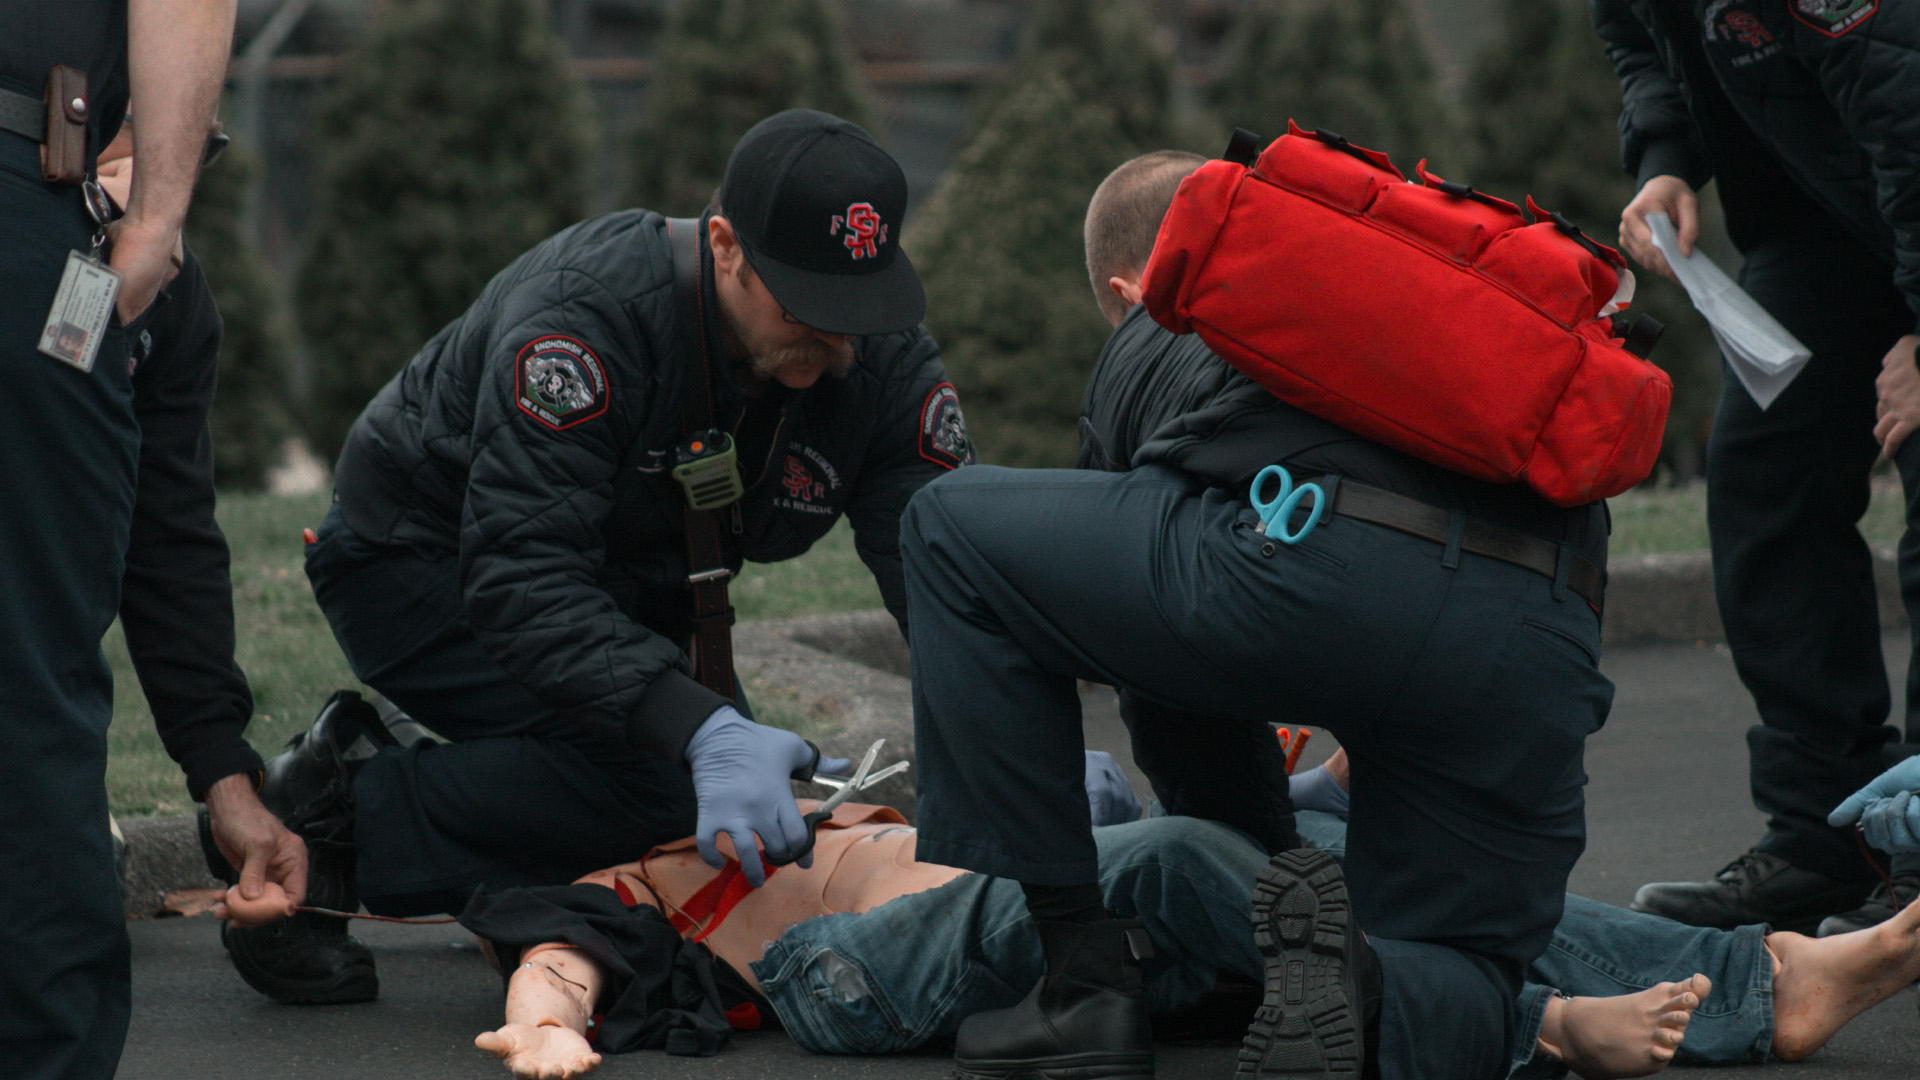 Top 8 Advantages of Simulation Training for First Responders